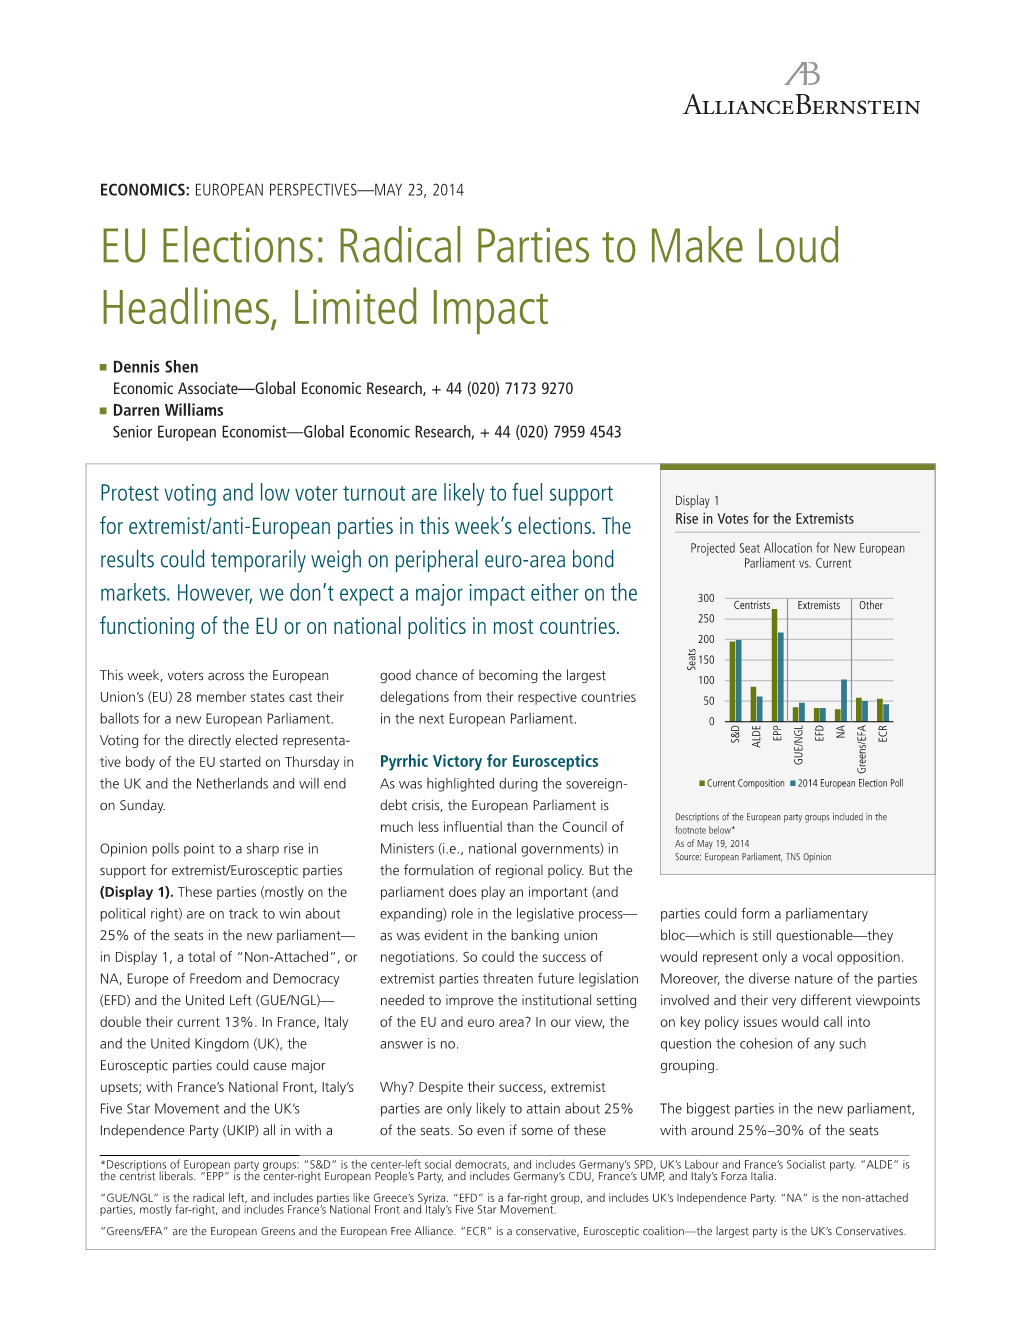 EU Elections: Radical Parties to Make Loud Headlines, Limited Impact